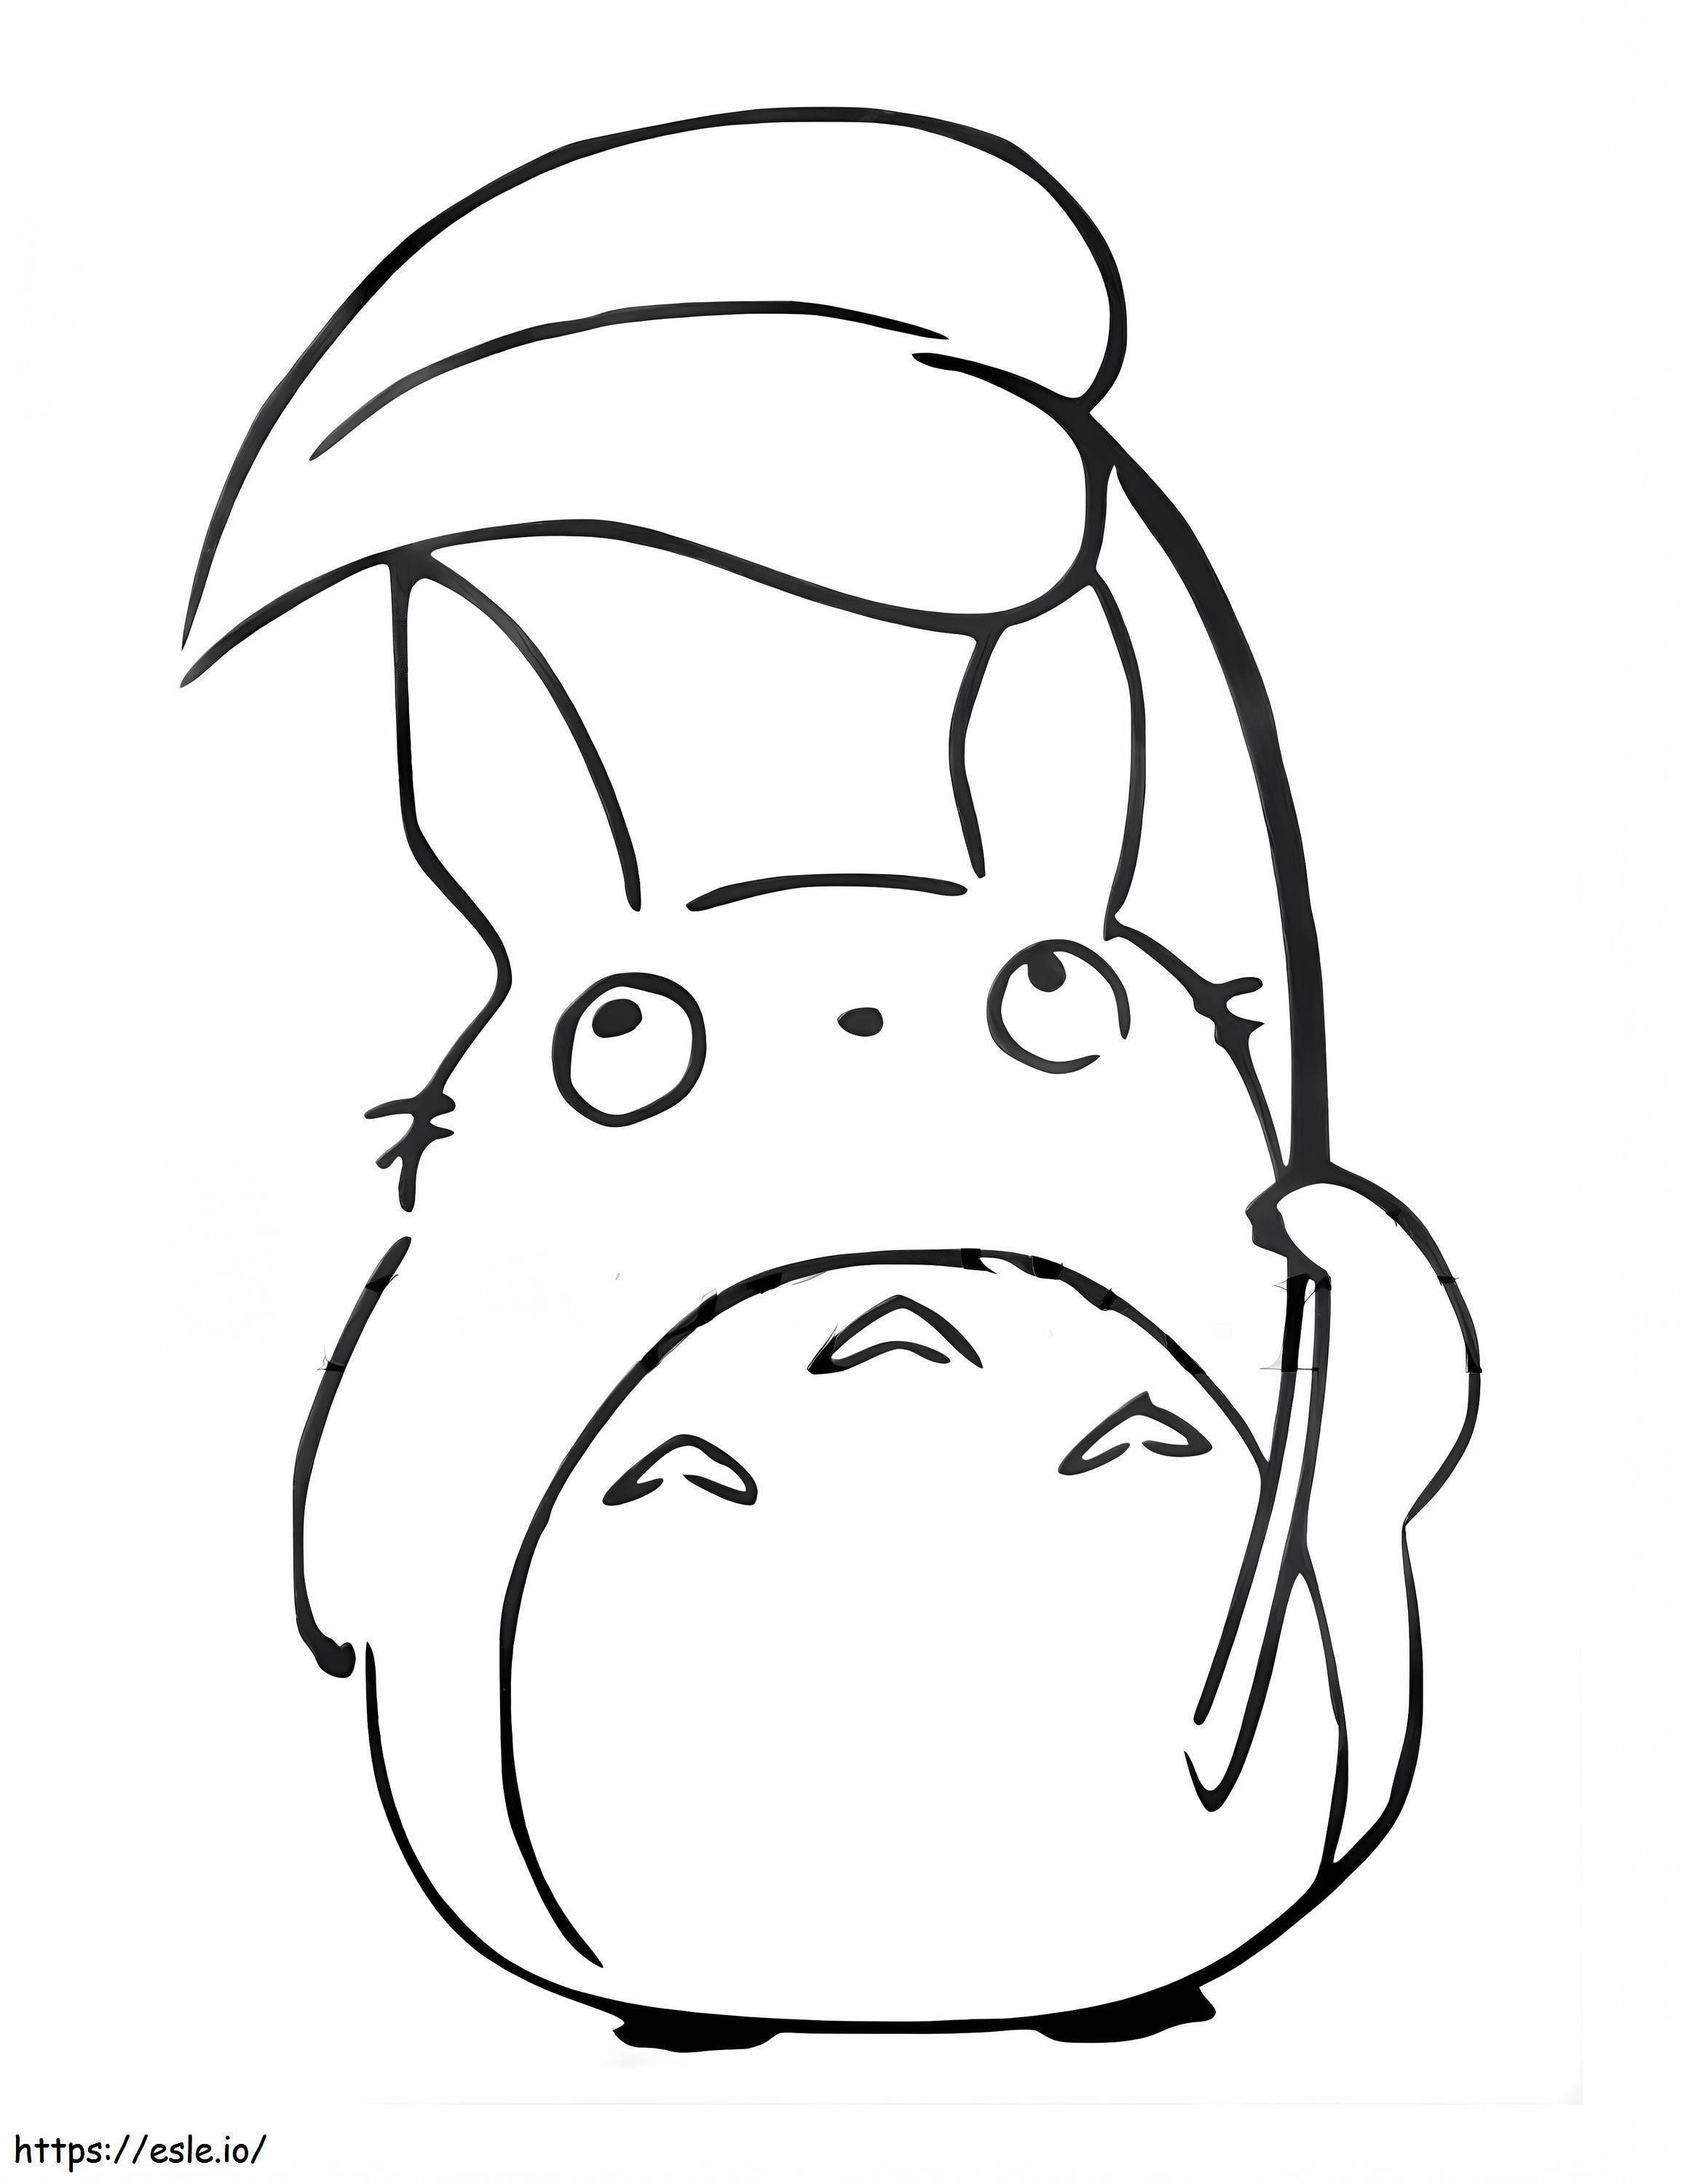 Cute Totoro 4 coloring page